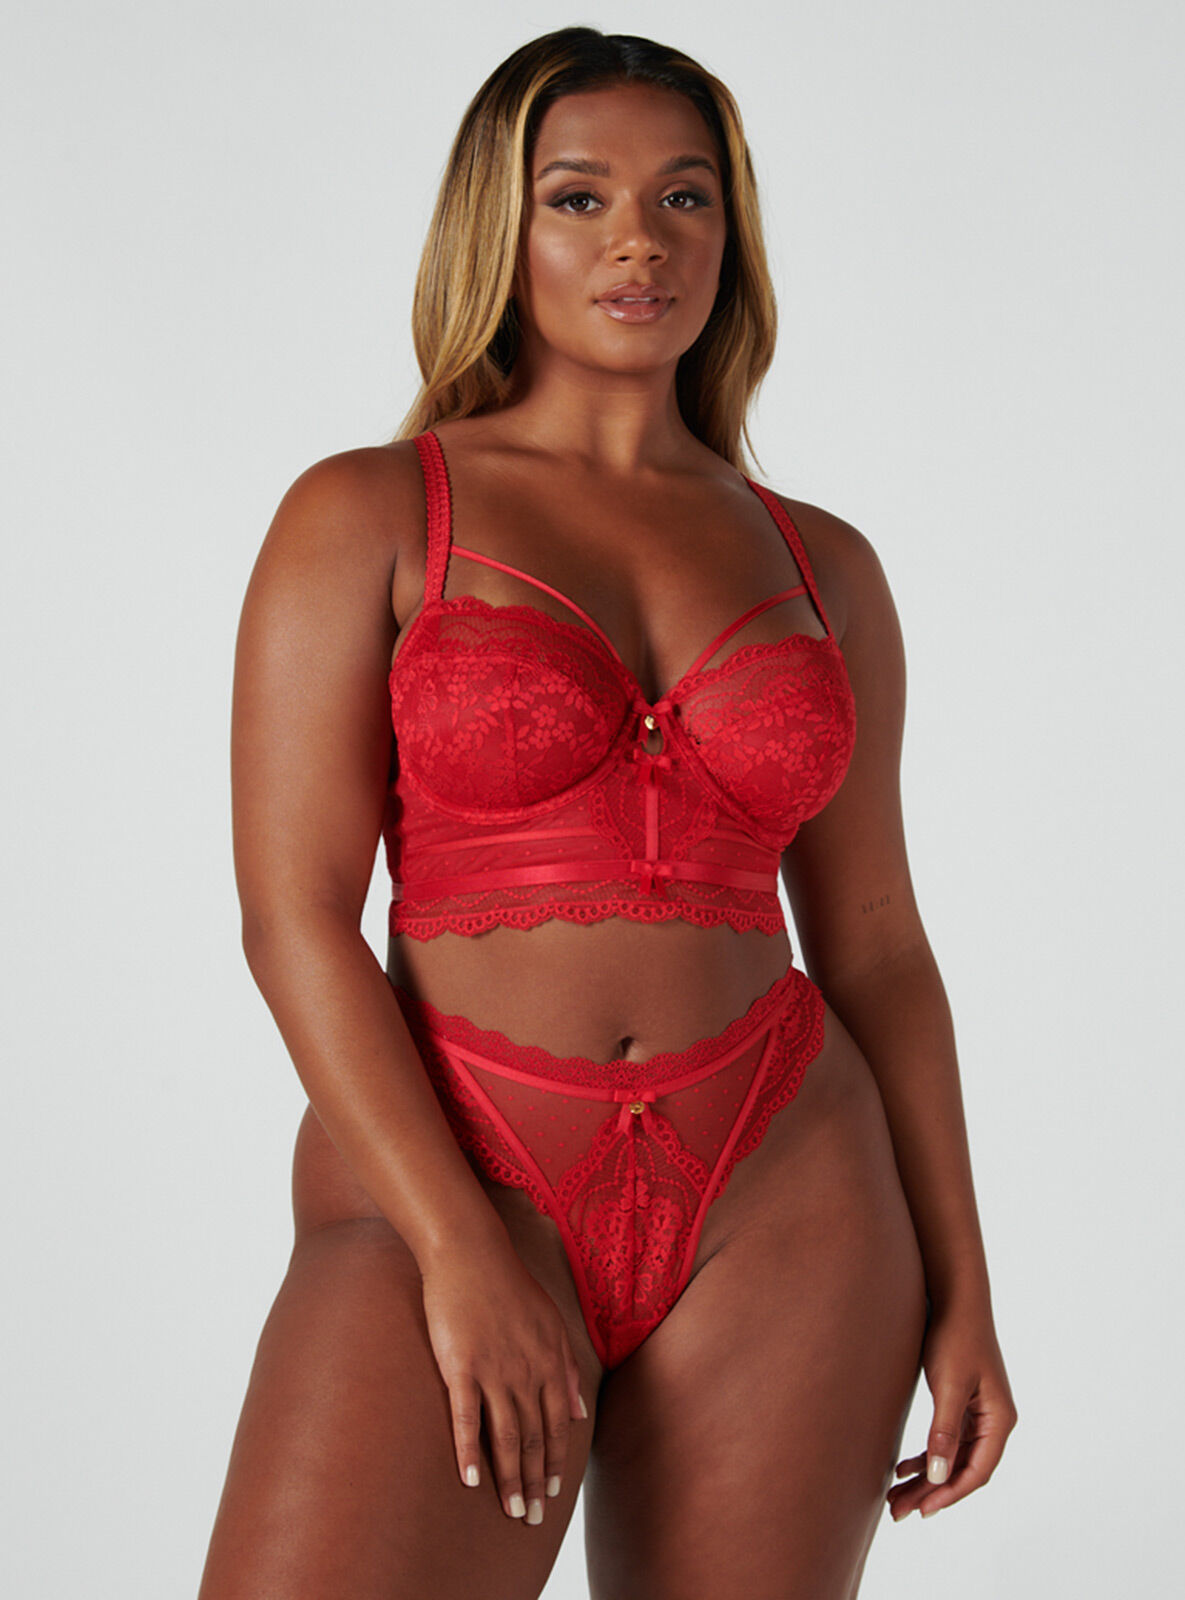 Boux Avenue Averie thong - Dark Red - 10